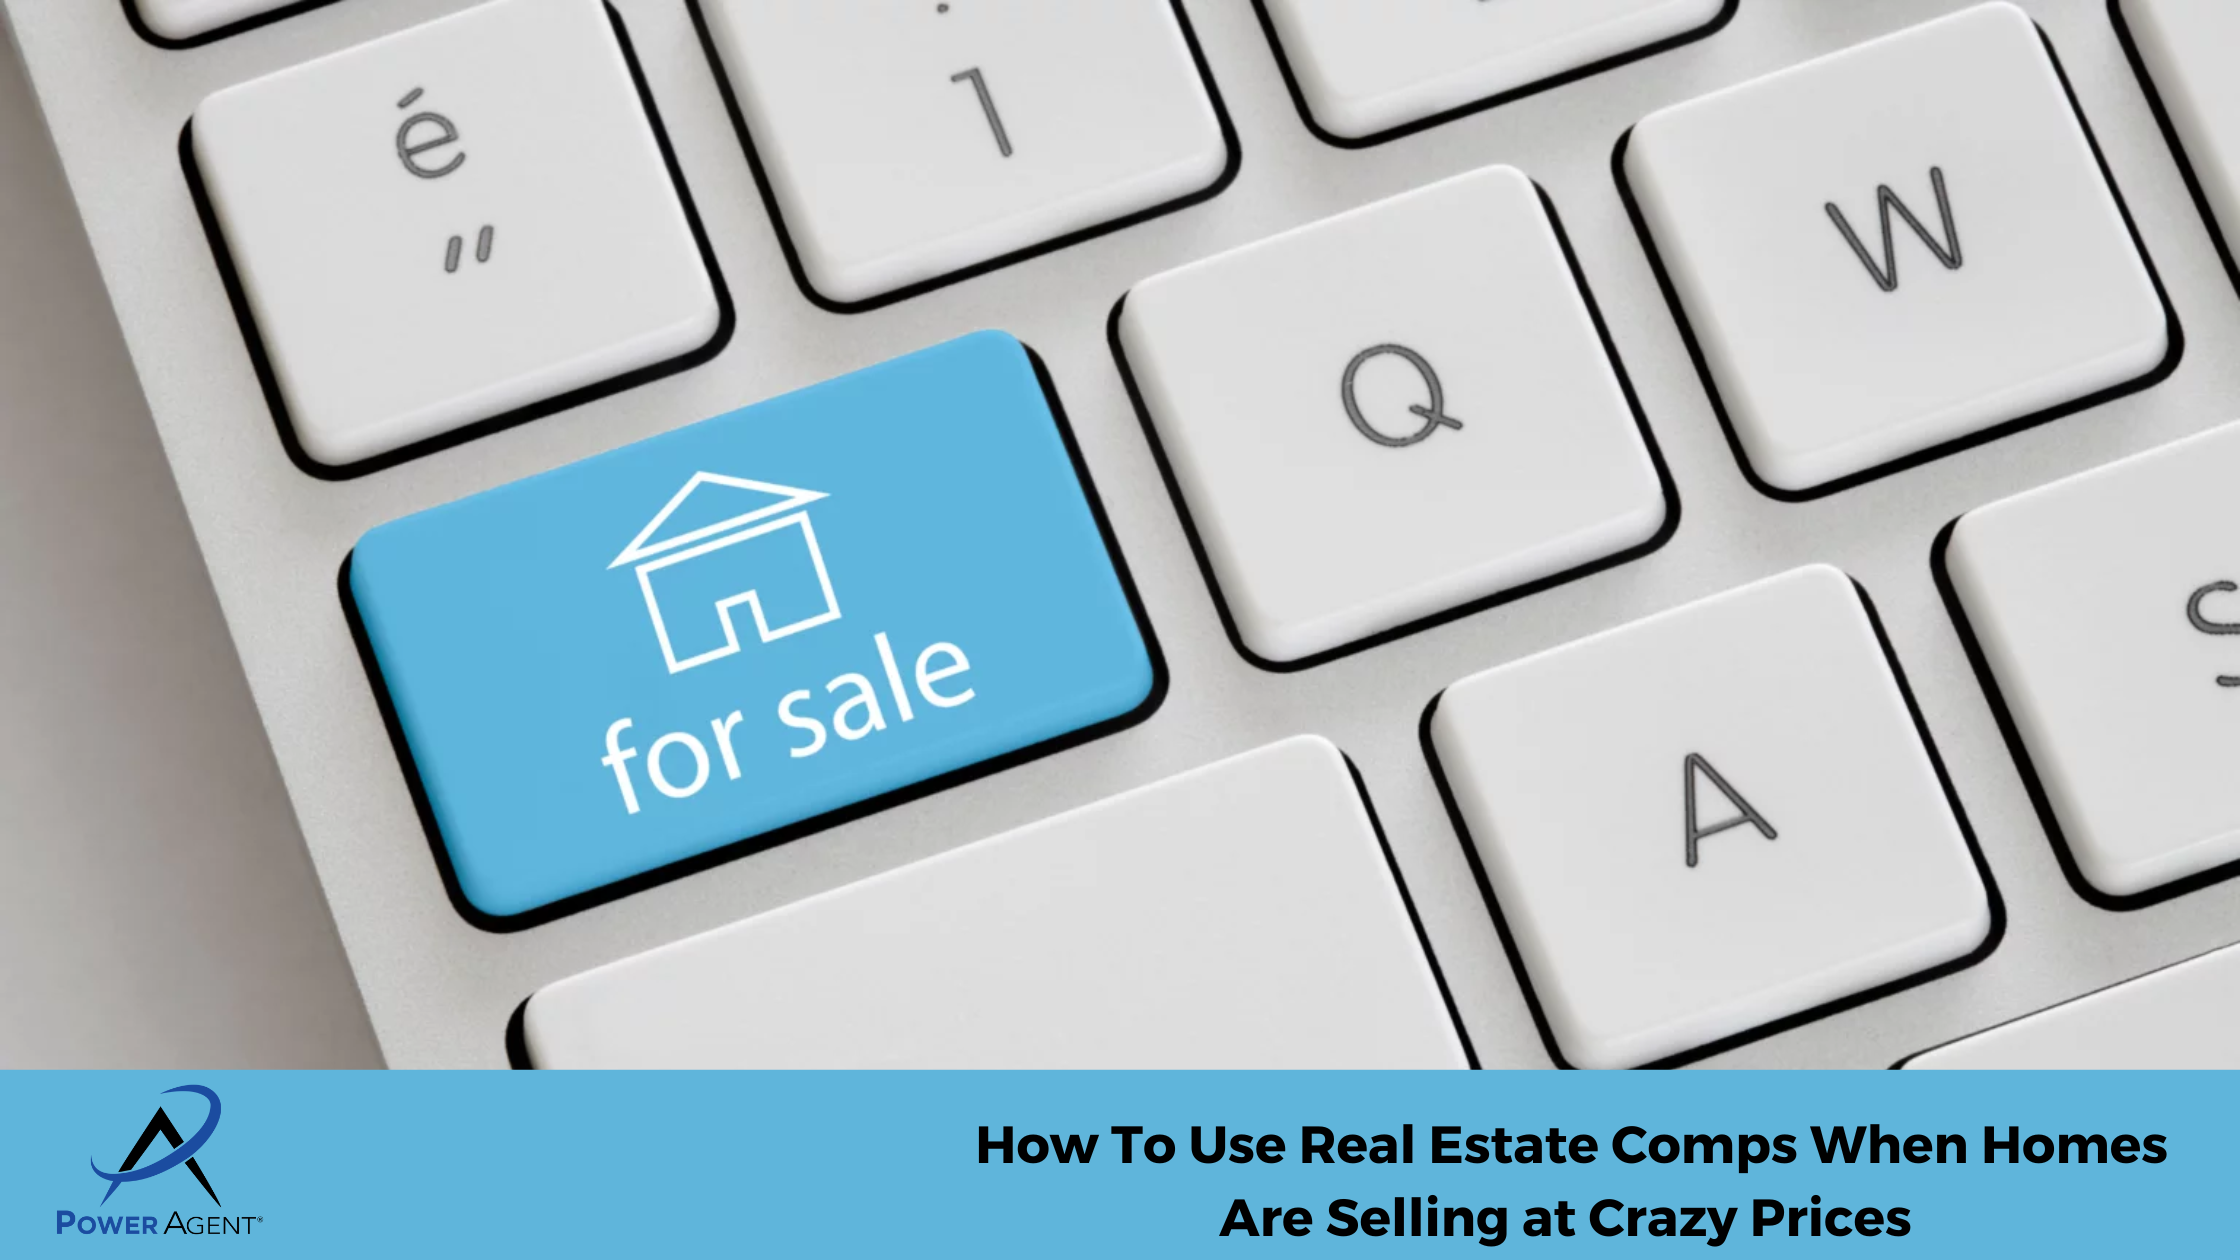 How To Use Real Estate Comps When Homes Are Selling at Crazy Prices